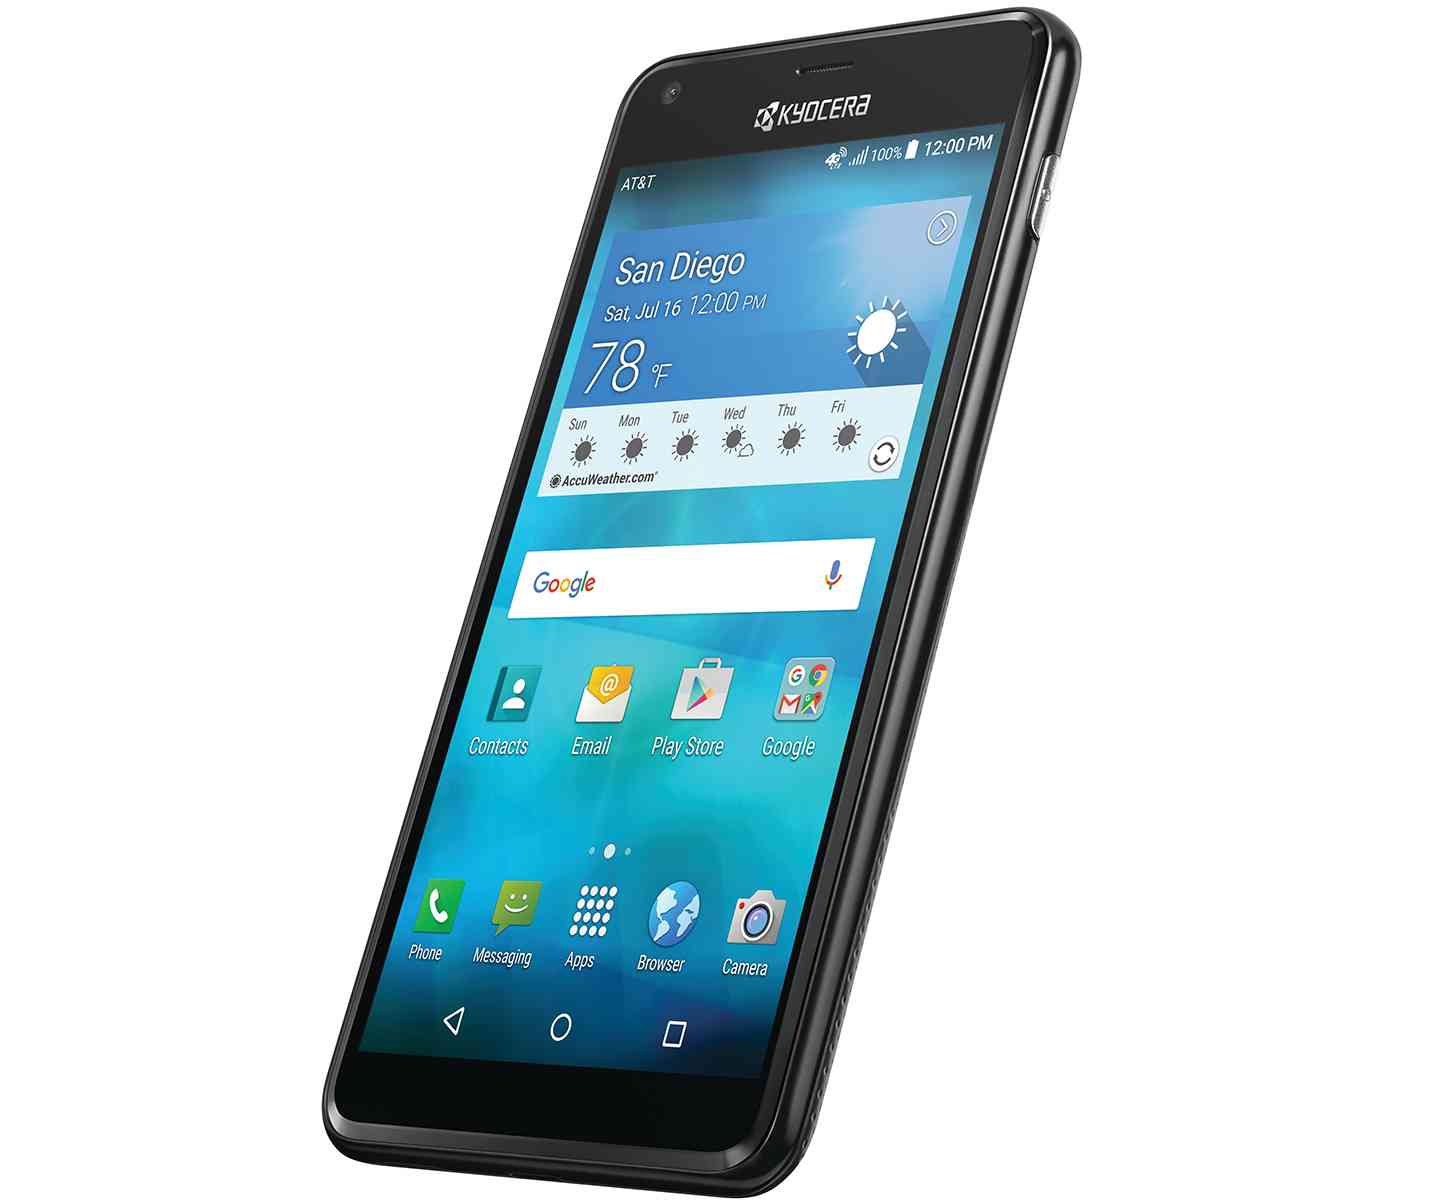 Kyocera Hydro Shore official AT&T GoPhone